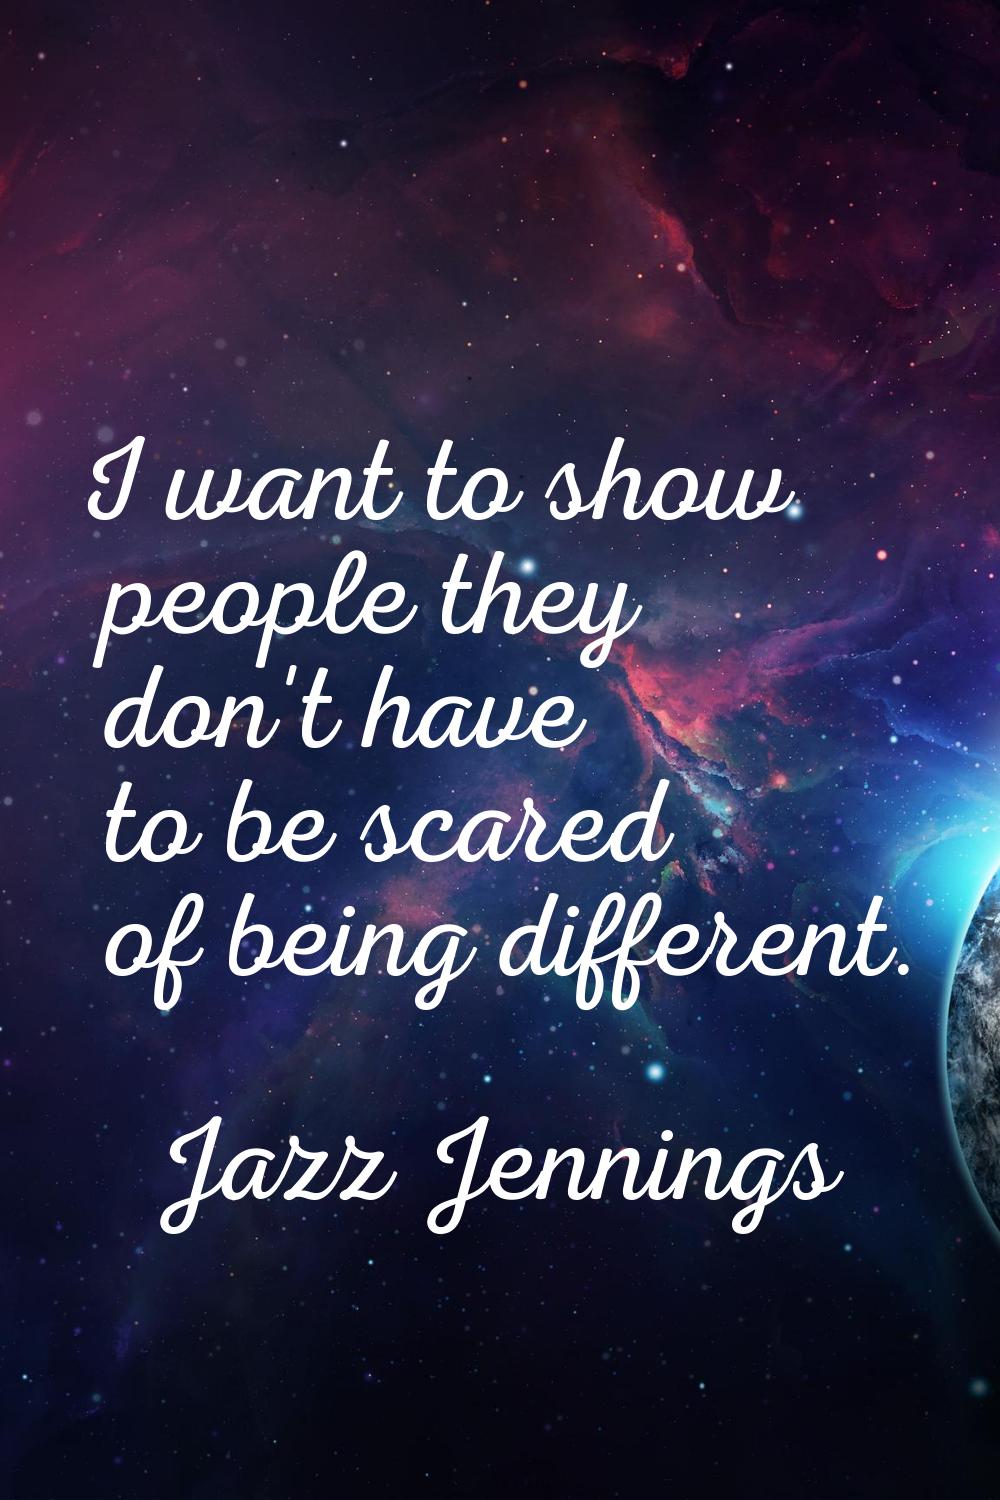 I want to show people they don't have to be scared of being different.